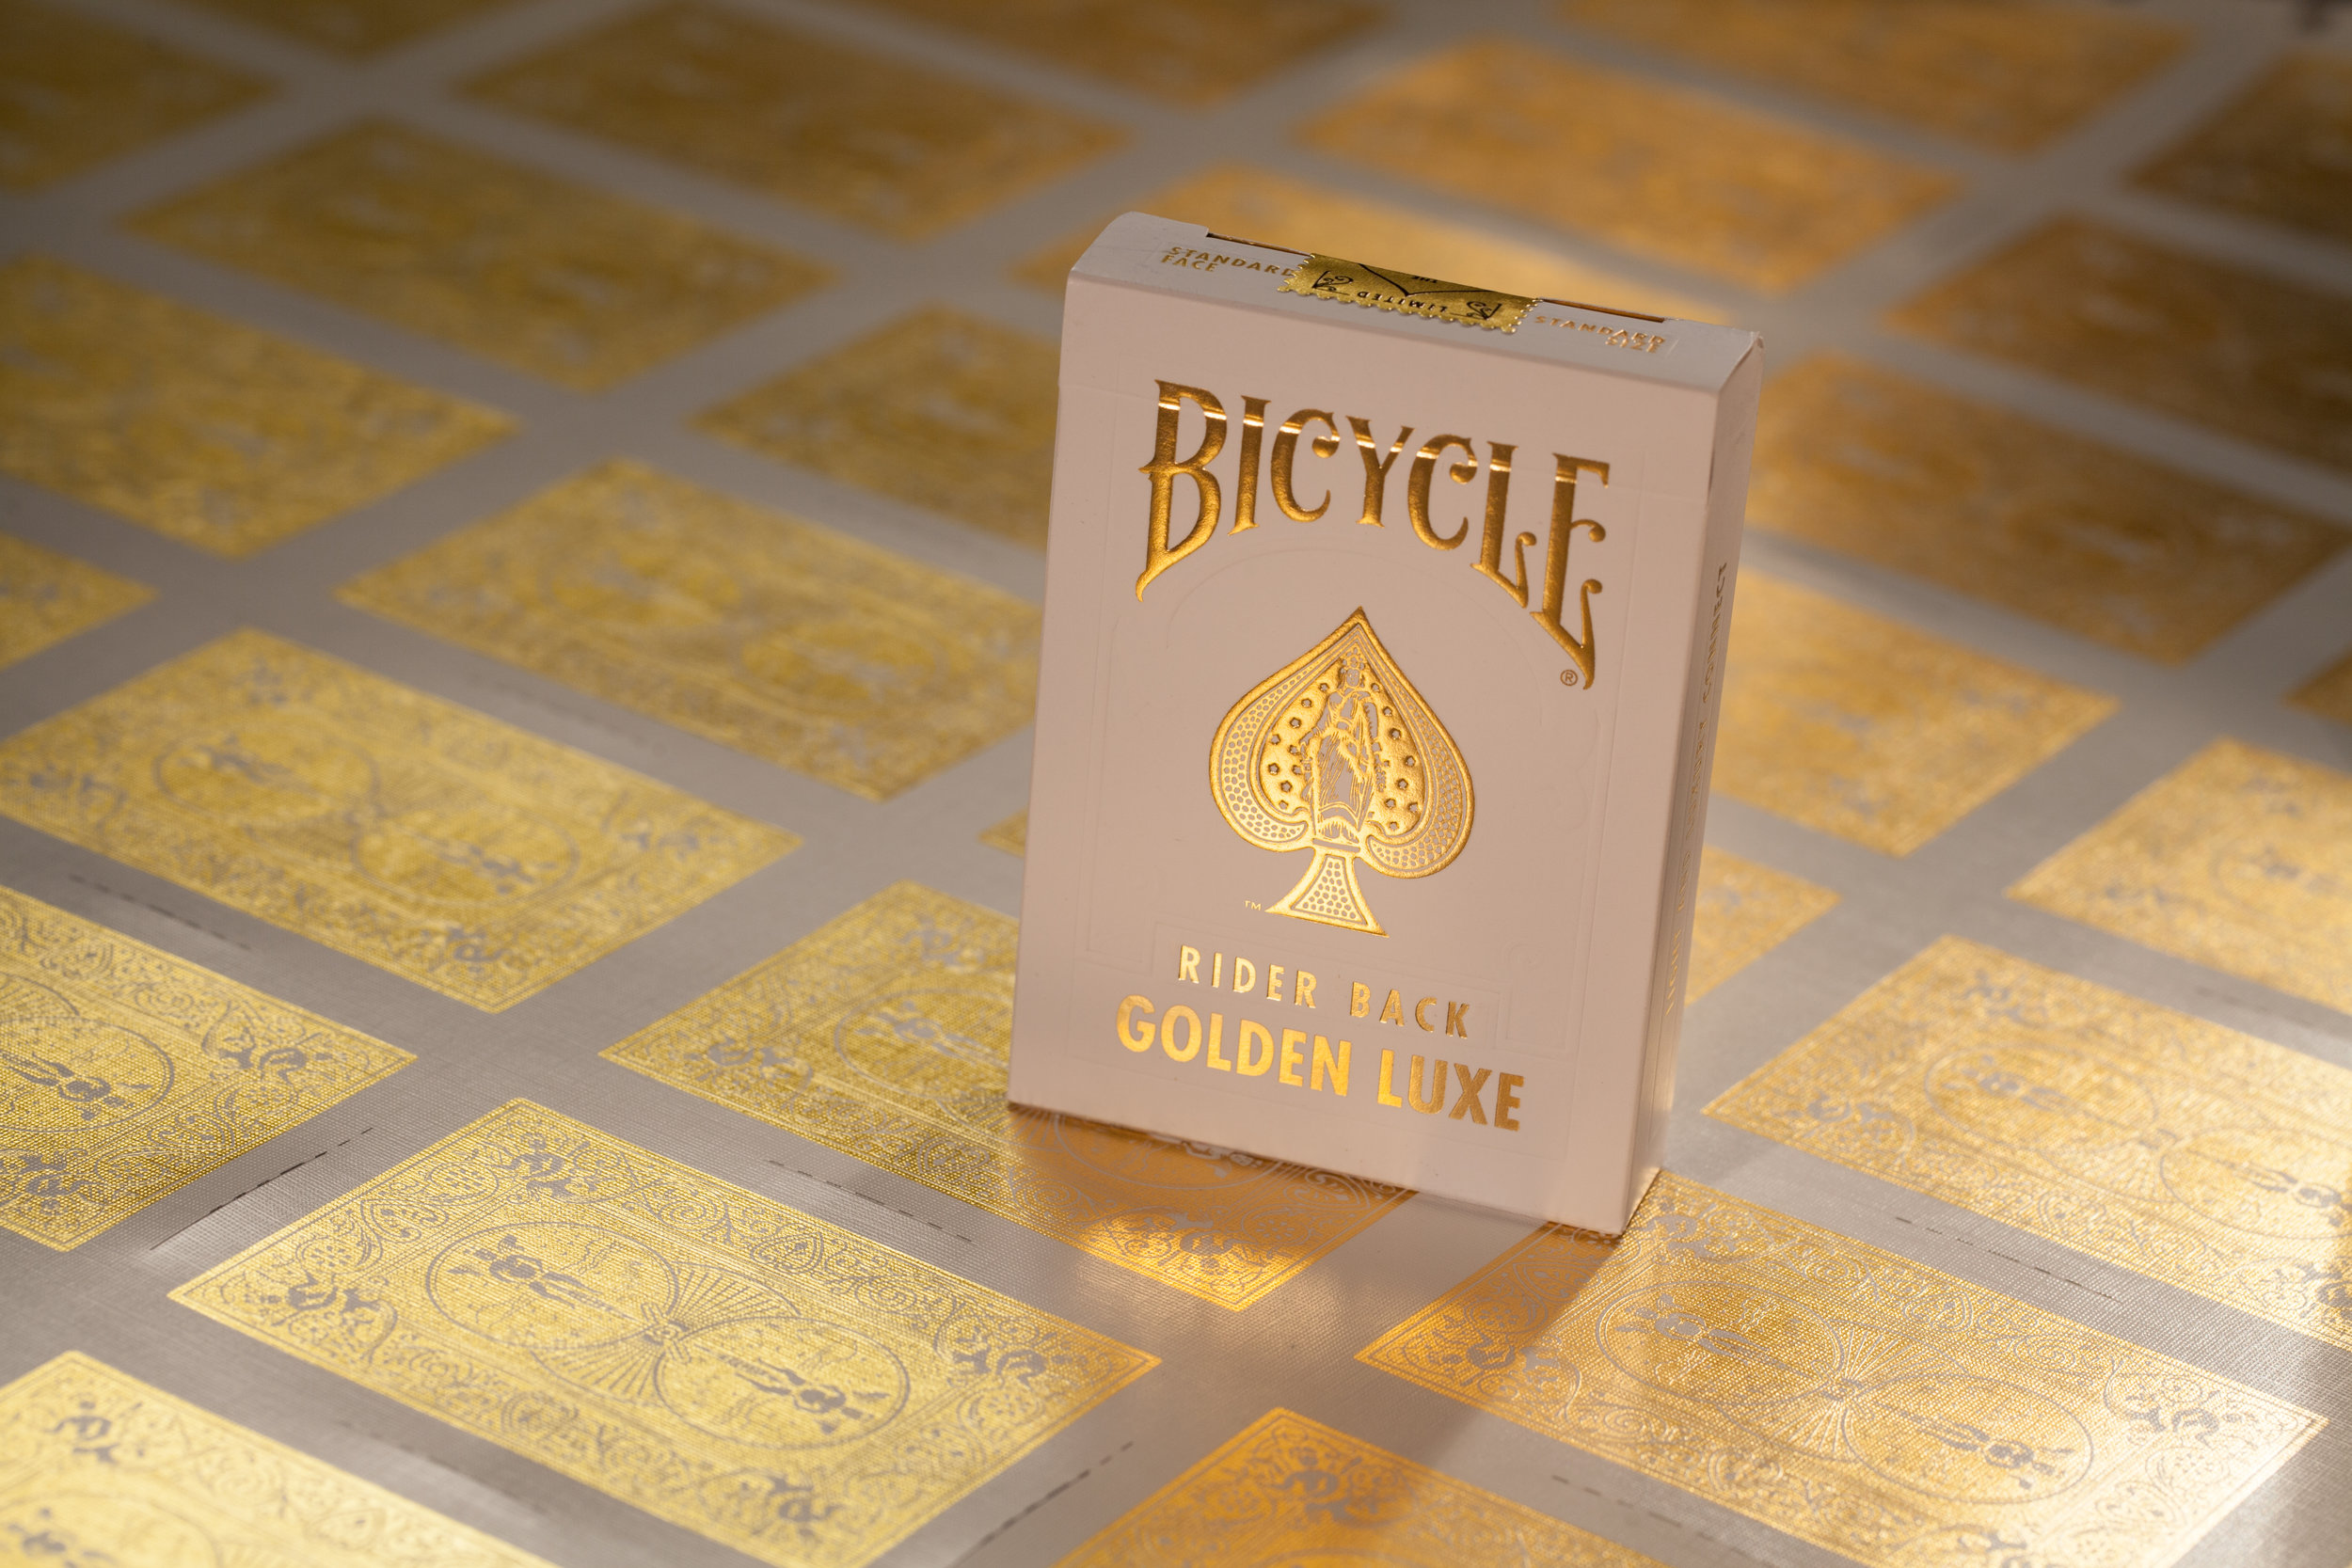 Bicycle Cards Site 